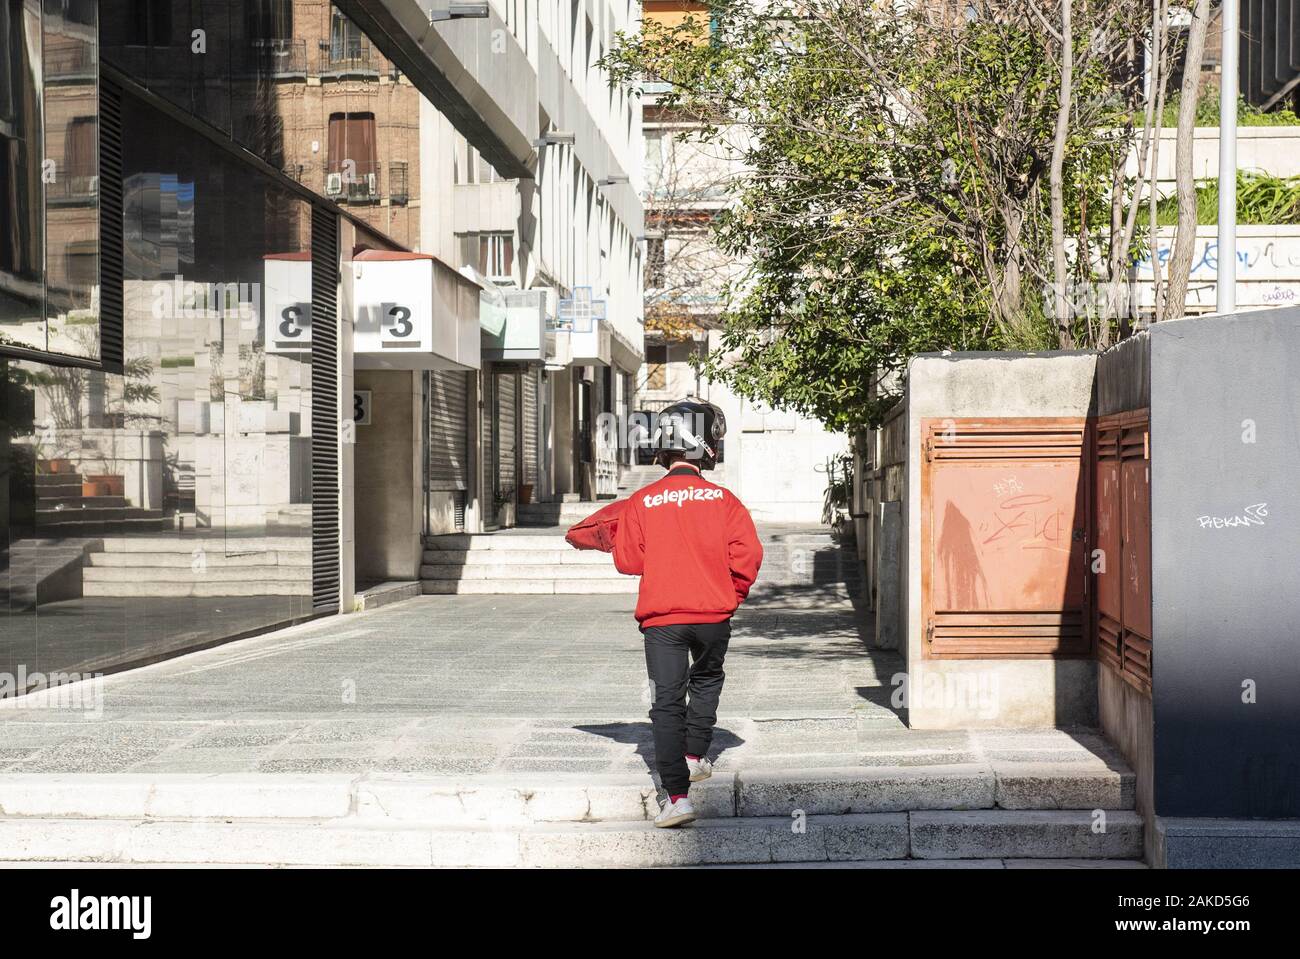 Spain. 1st Jan, 2020. Spanish pizza restaurant franchise Telepizza worker seen collecting food orders at a restaurant in Spain. Credit: Budrul Chukrut/SOPA Images/ZUMA Wire/Alamy Live News Stock Photo